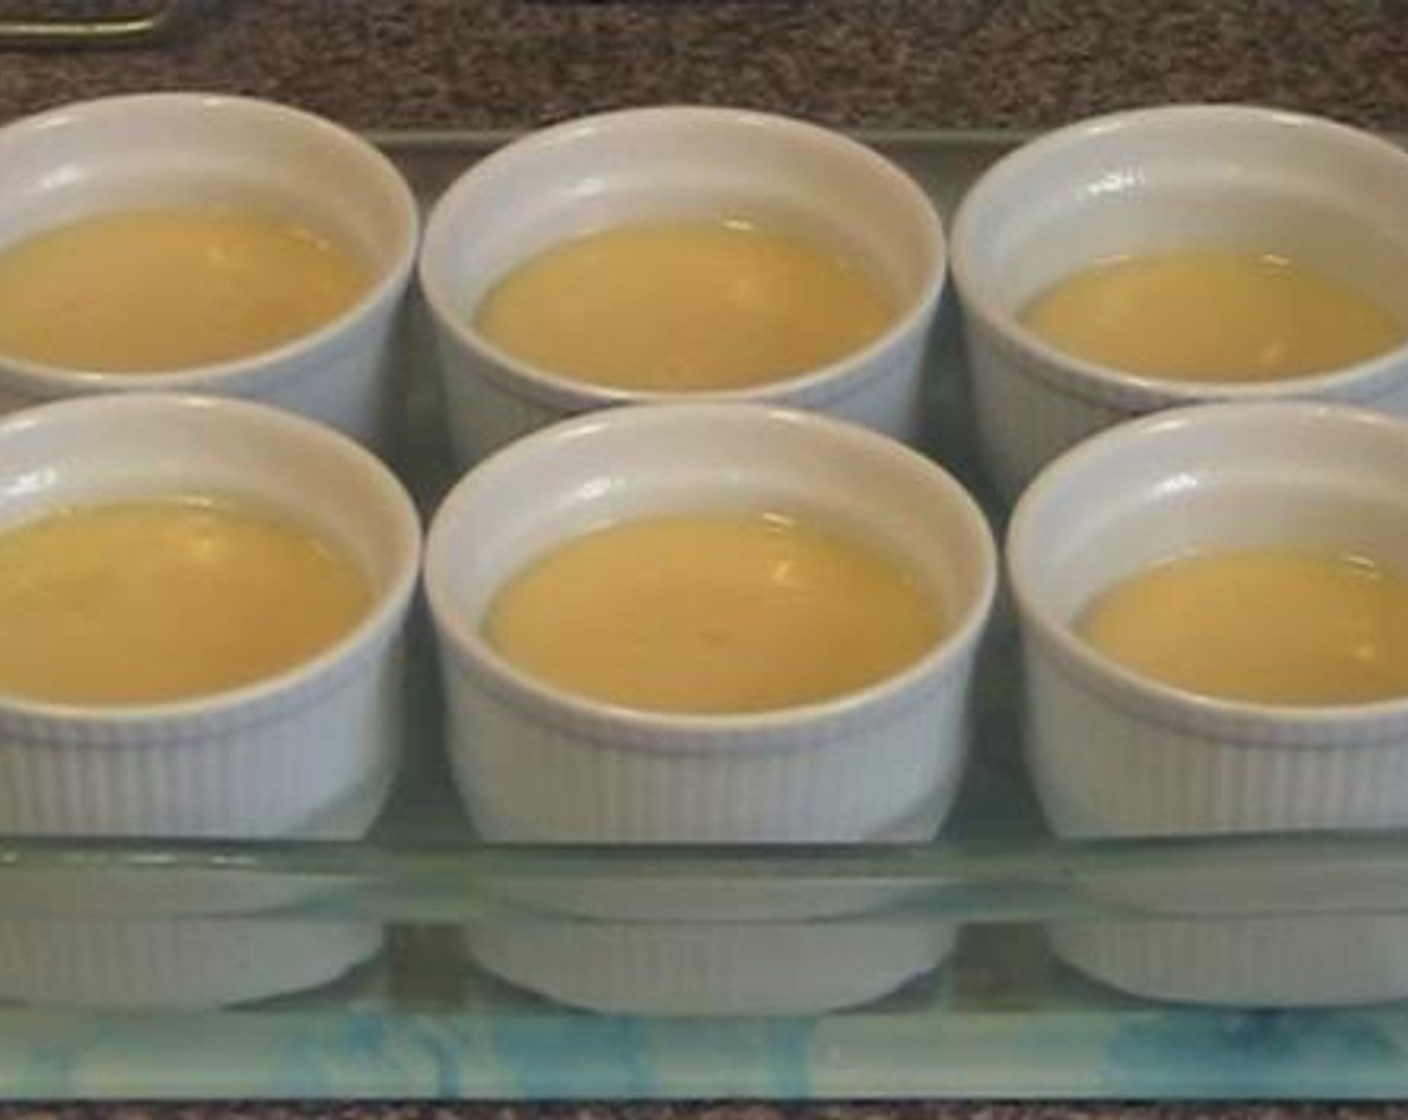 step 3 Divide the pudding mixture between 6 greased baking cups. Line up the cups inside a baking dish and fill in the dish with boiling water until it is halfway through the height of each cup. Bake inside a preheated oven under 180 degrees C (350 degrees F) for about 1 hour.